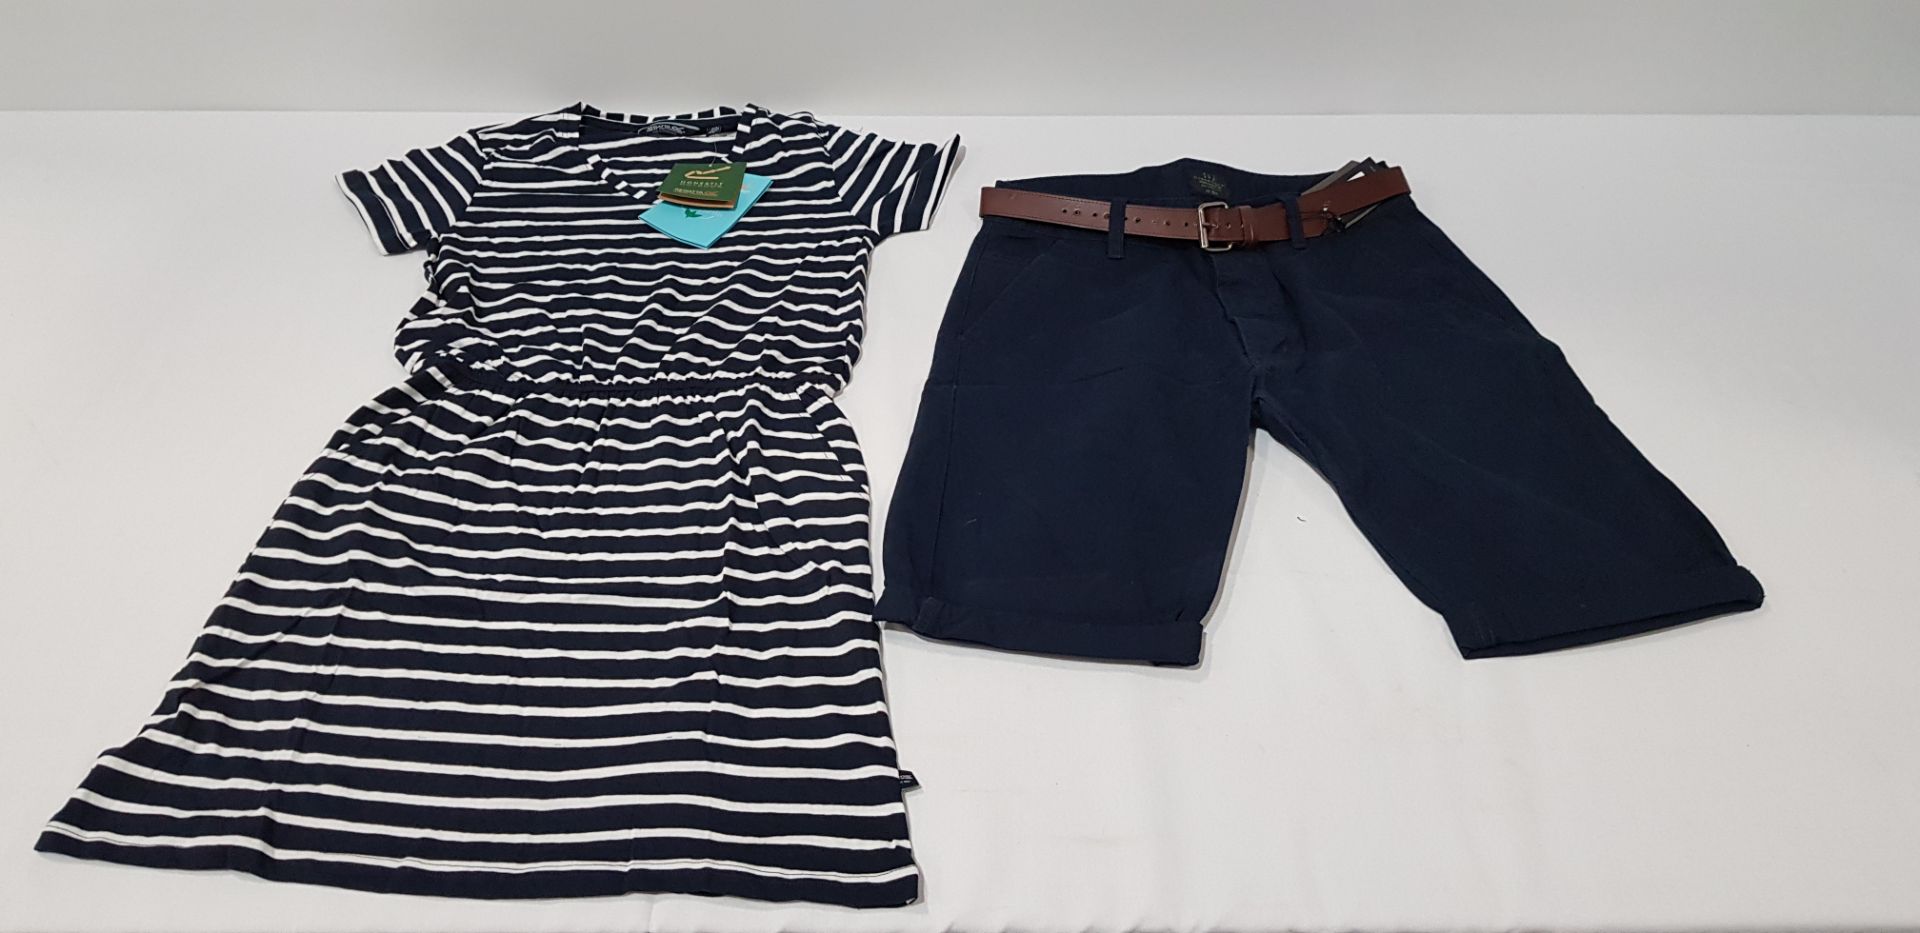 16 X BRAND NEW MIXED LOT CONTAINING 10 SMITH AND JONES NAVY CHINO SHORTS WITH BELT IN SIZE 30 WAIST,